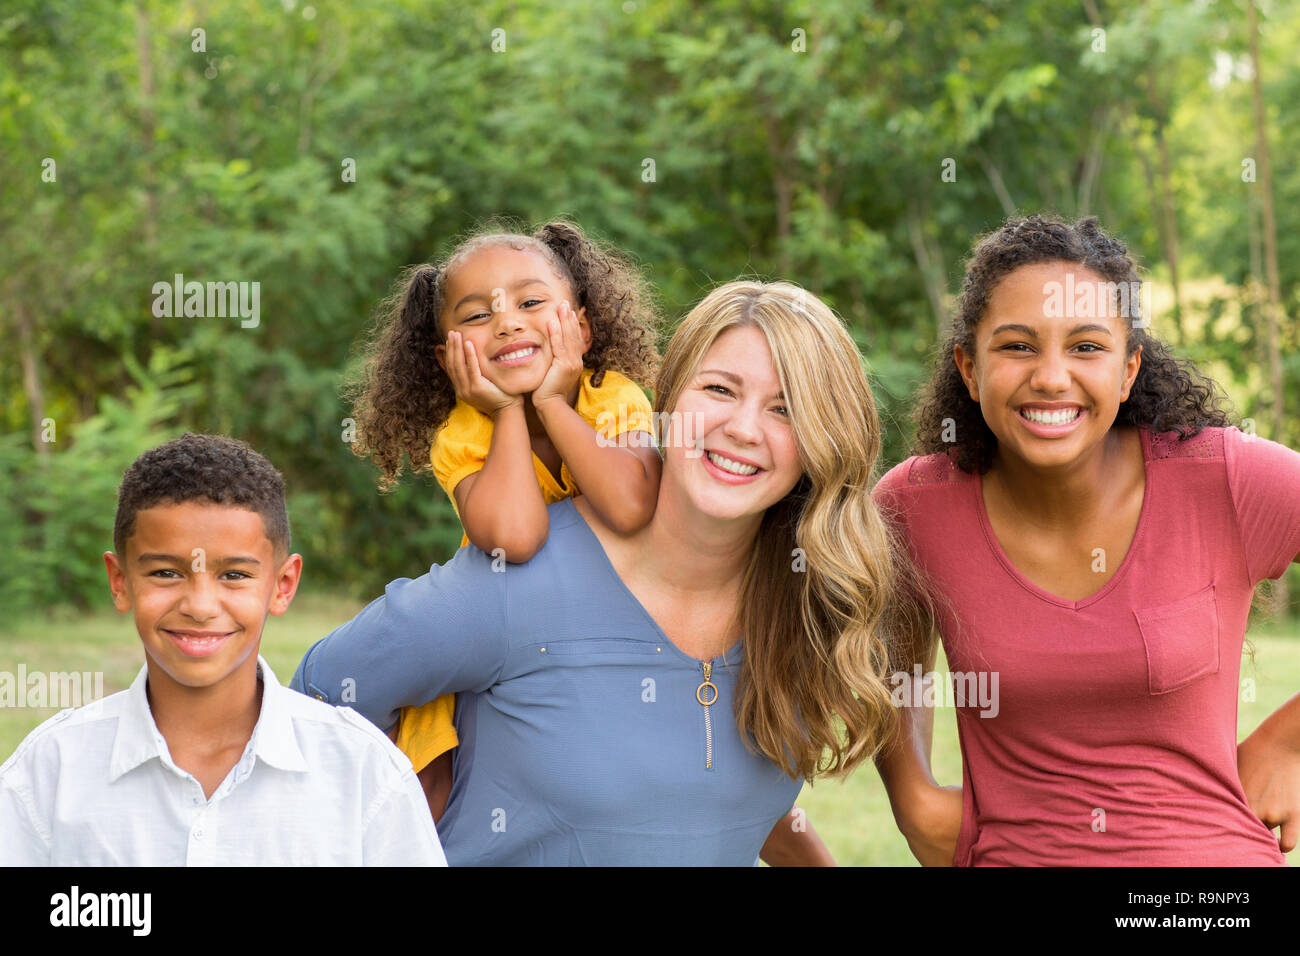 Portrait of a happy mixed race family smiling Banque D'Images